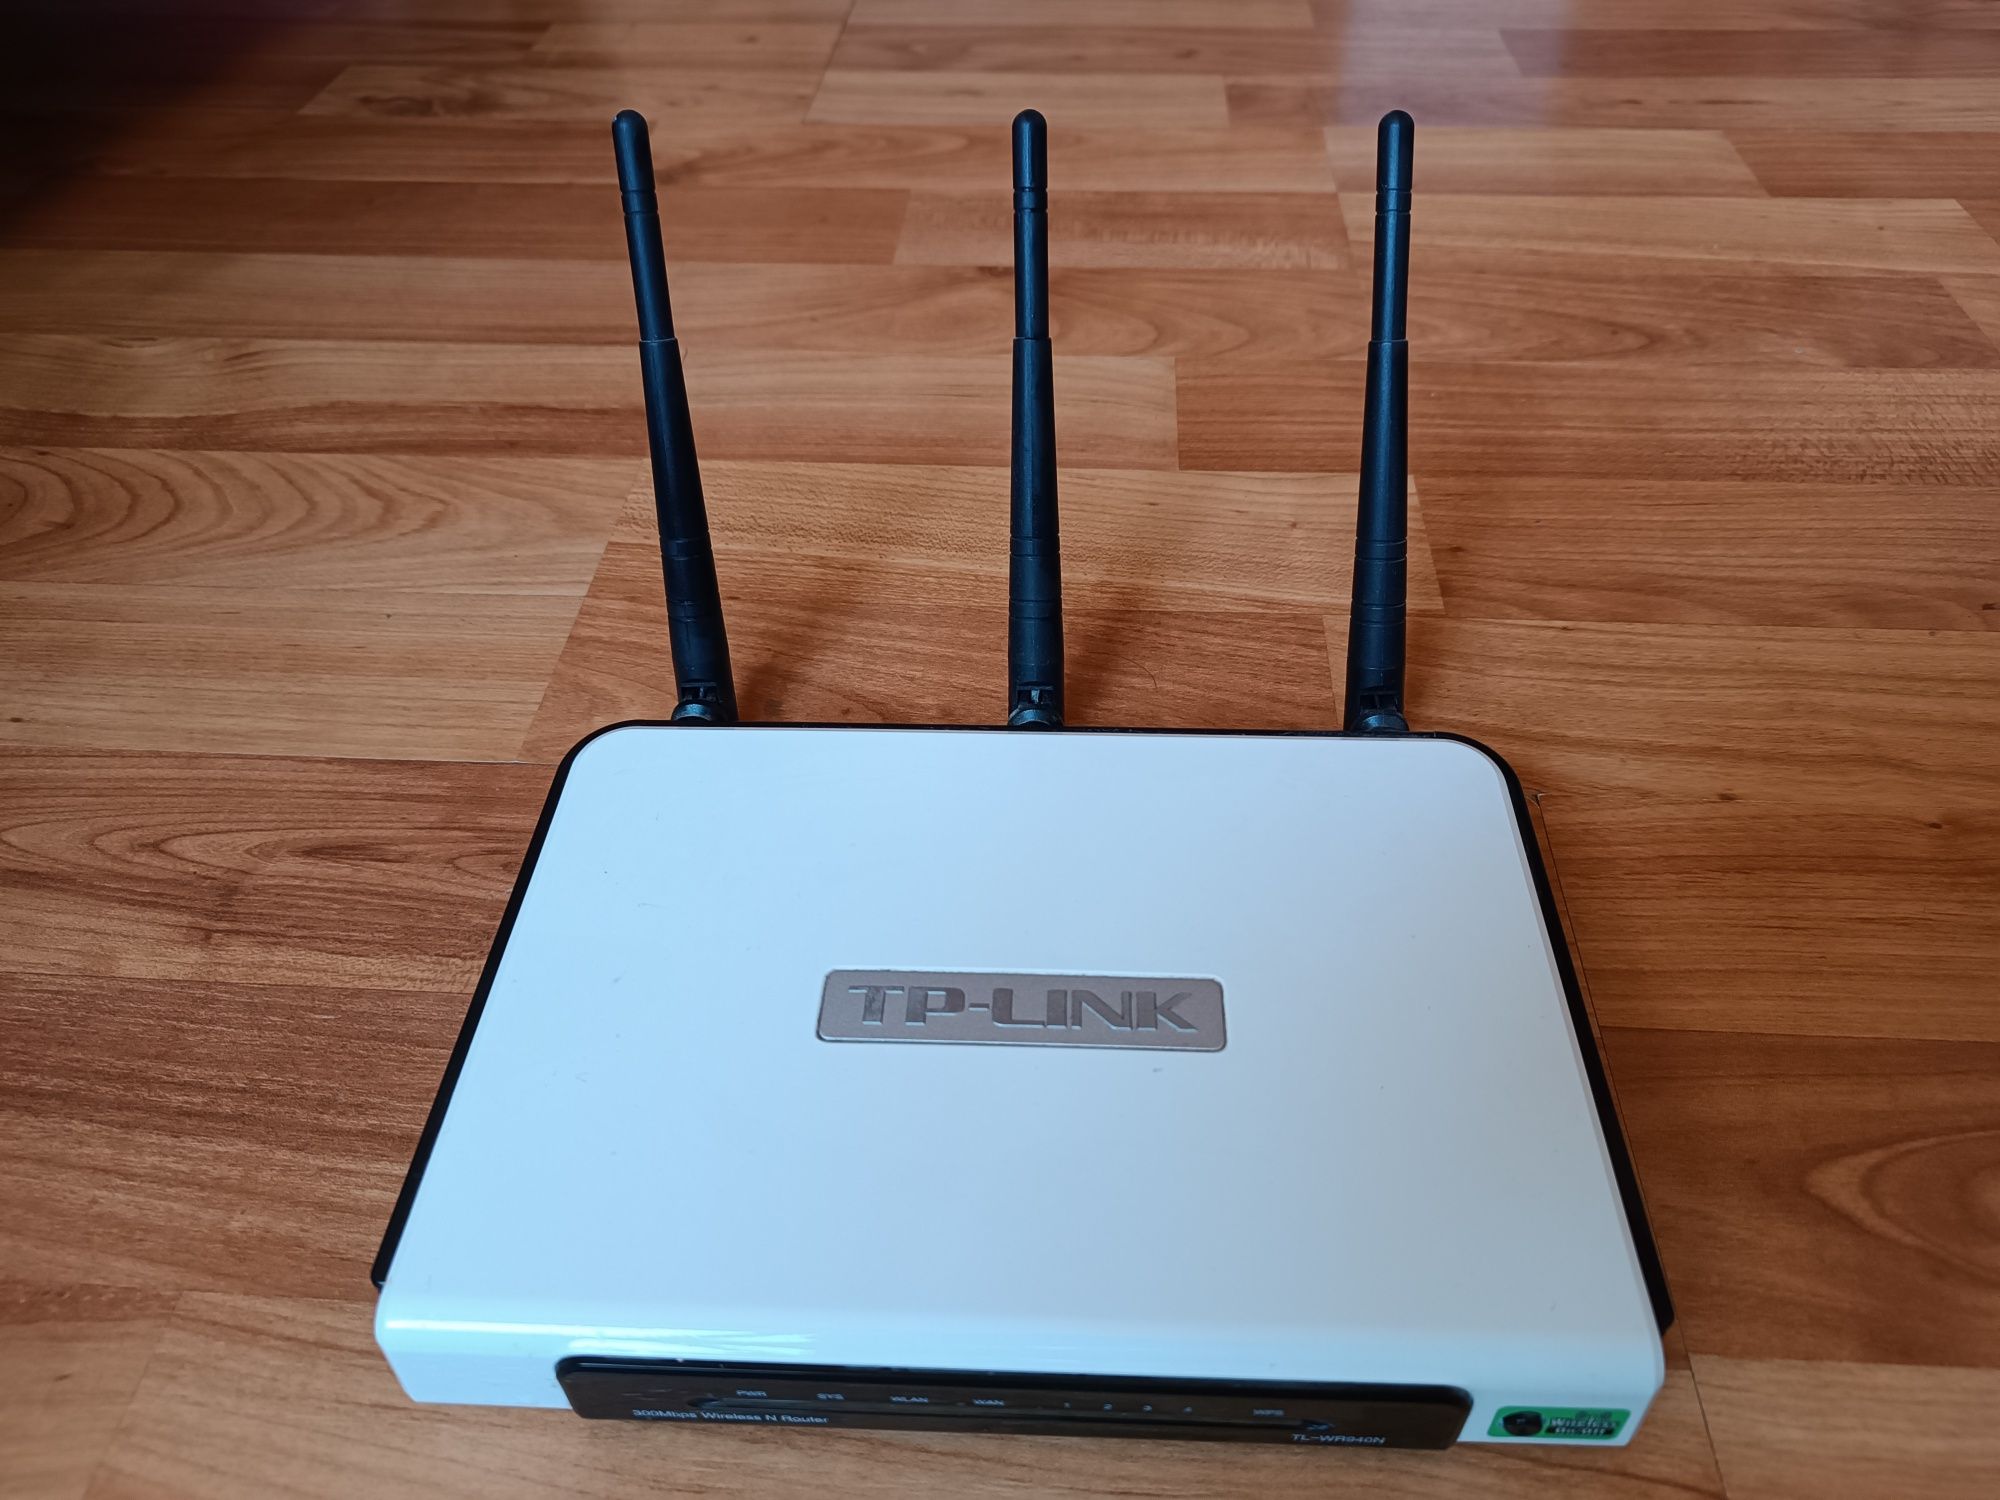 Router Wireless Tp-Link